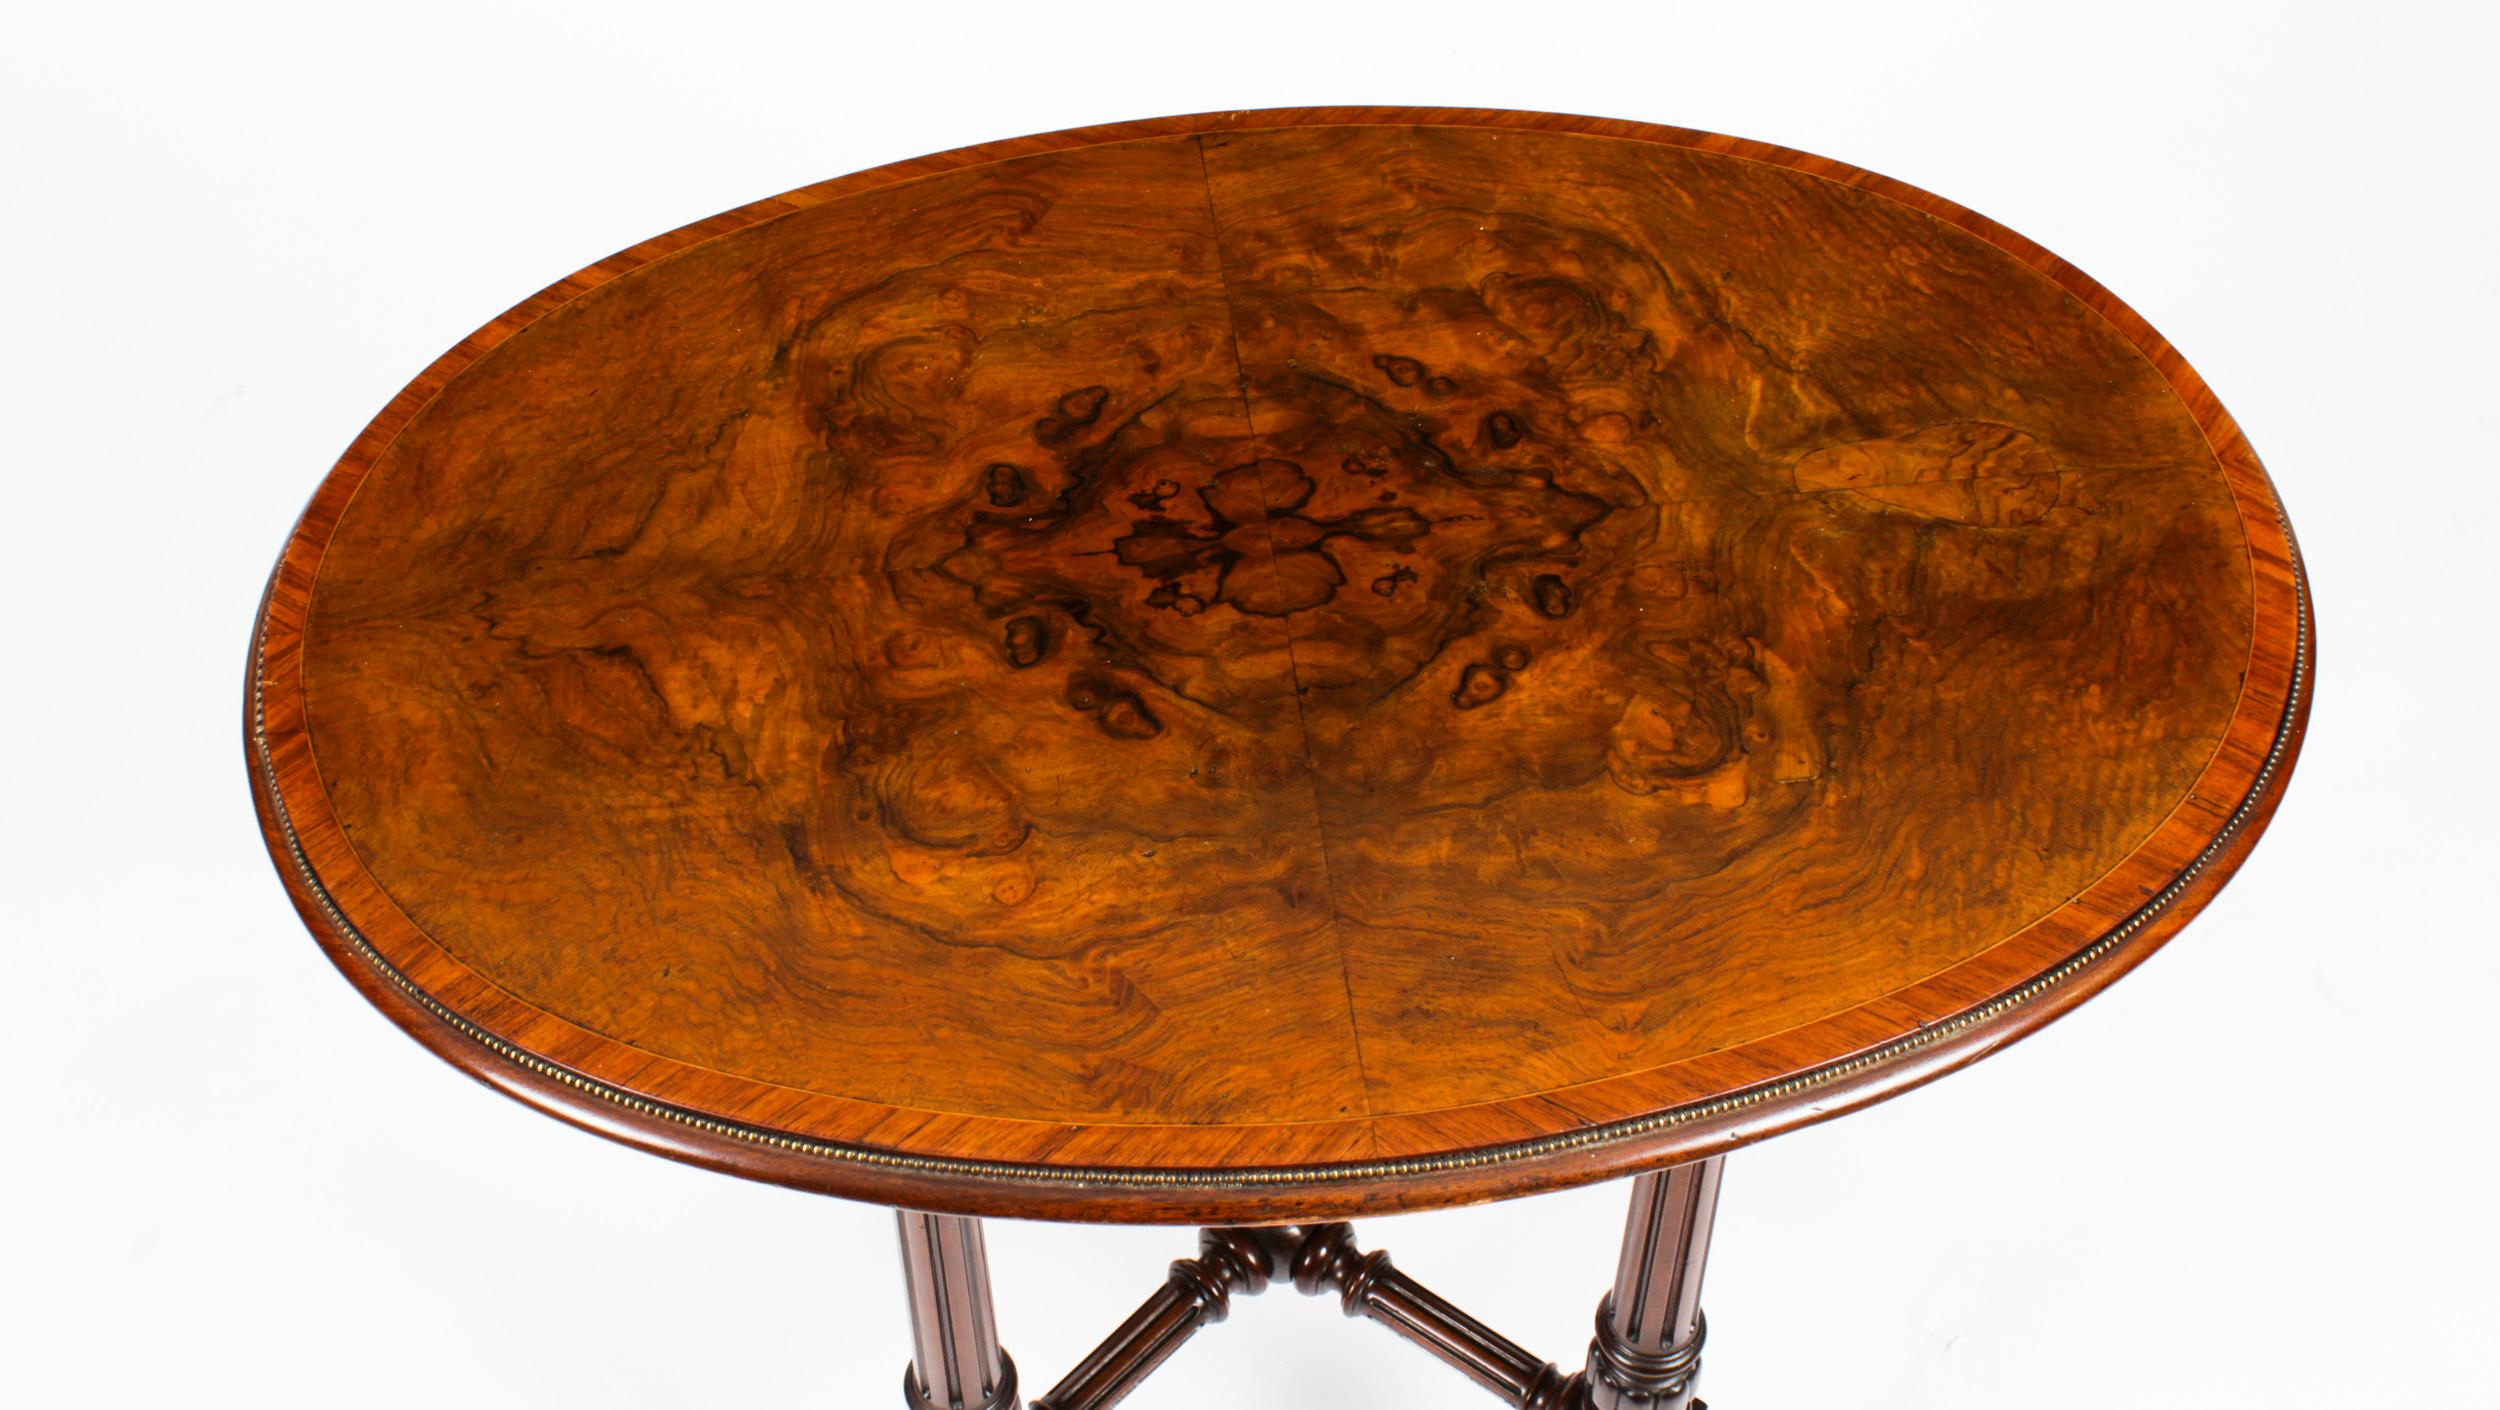 English Antique Victorian Burr Walnut & inlaid Occasional Table 19th Century